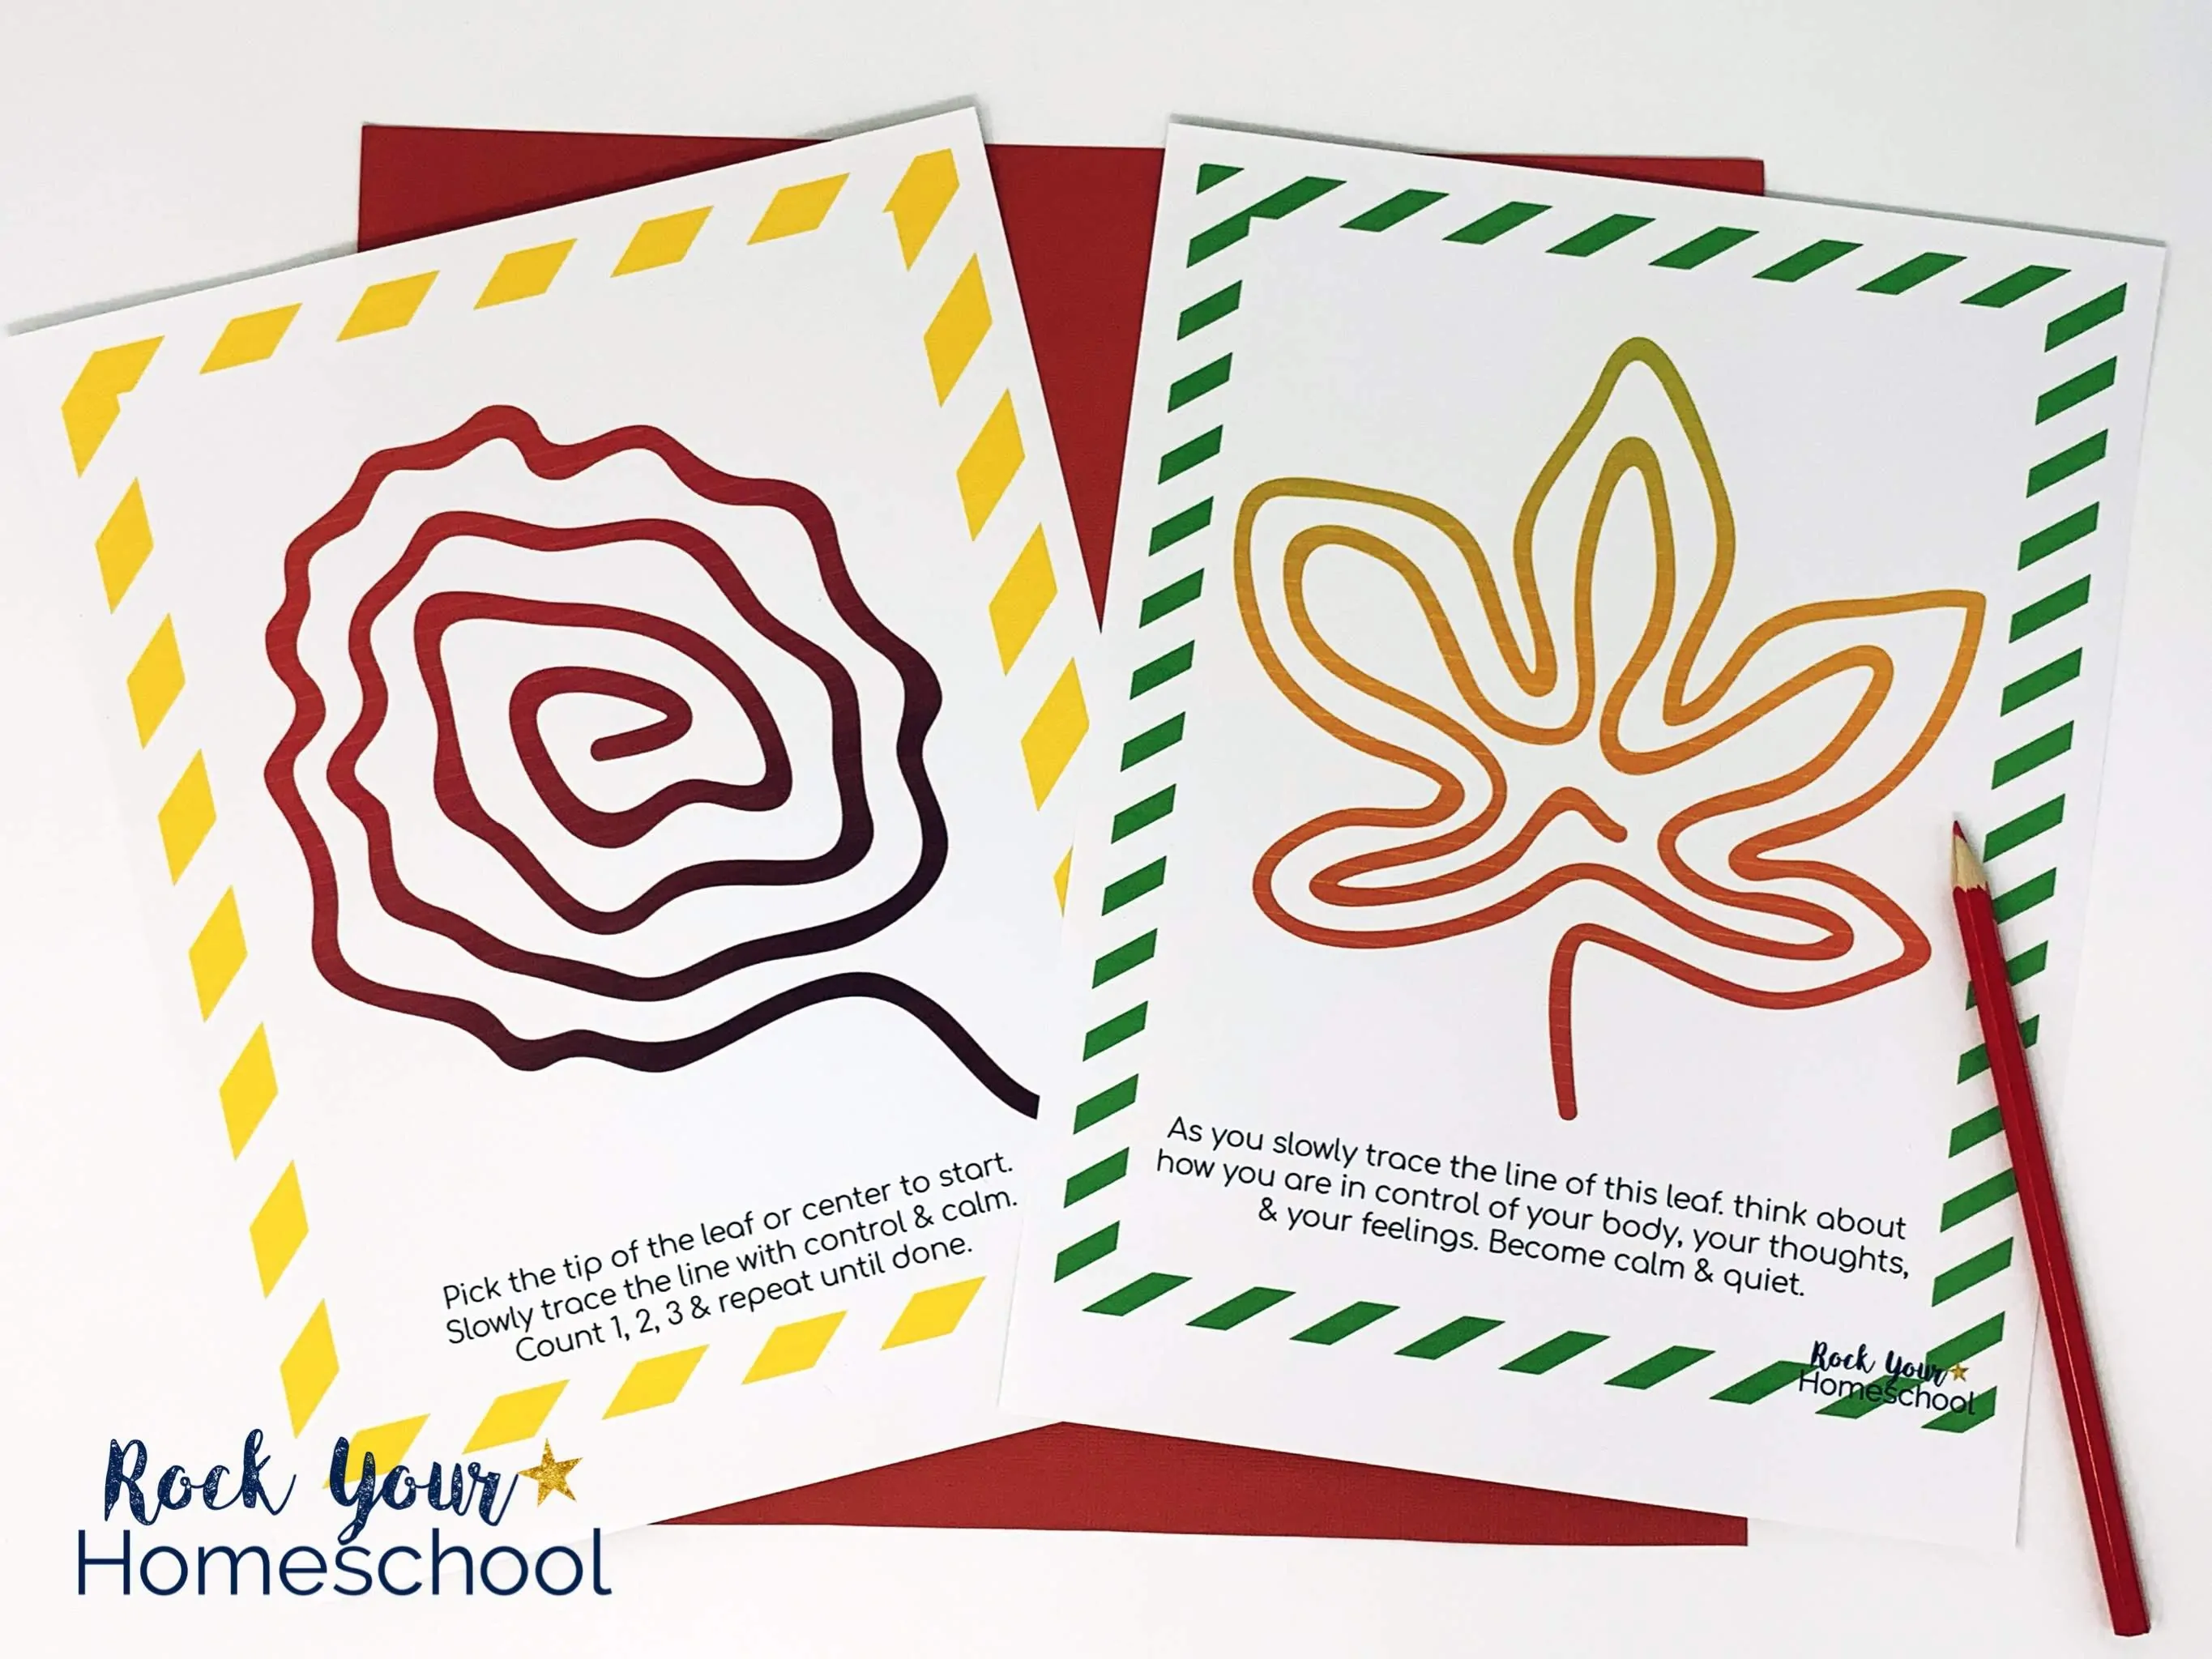 These free printable mindfulness activities for kids featuring Fall leaves are easy yet powerful practices to learn growth mindset skills.